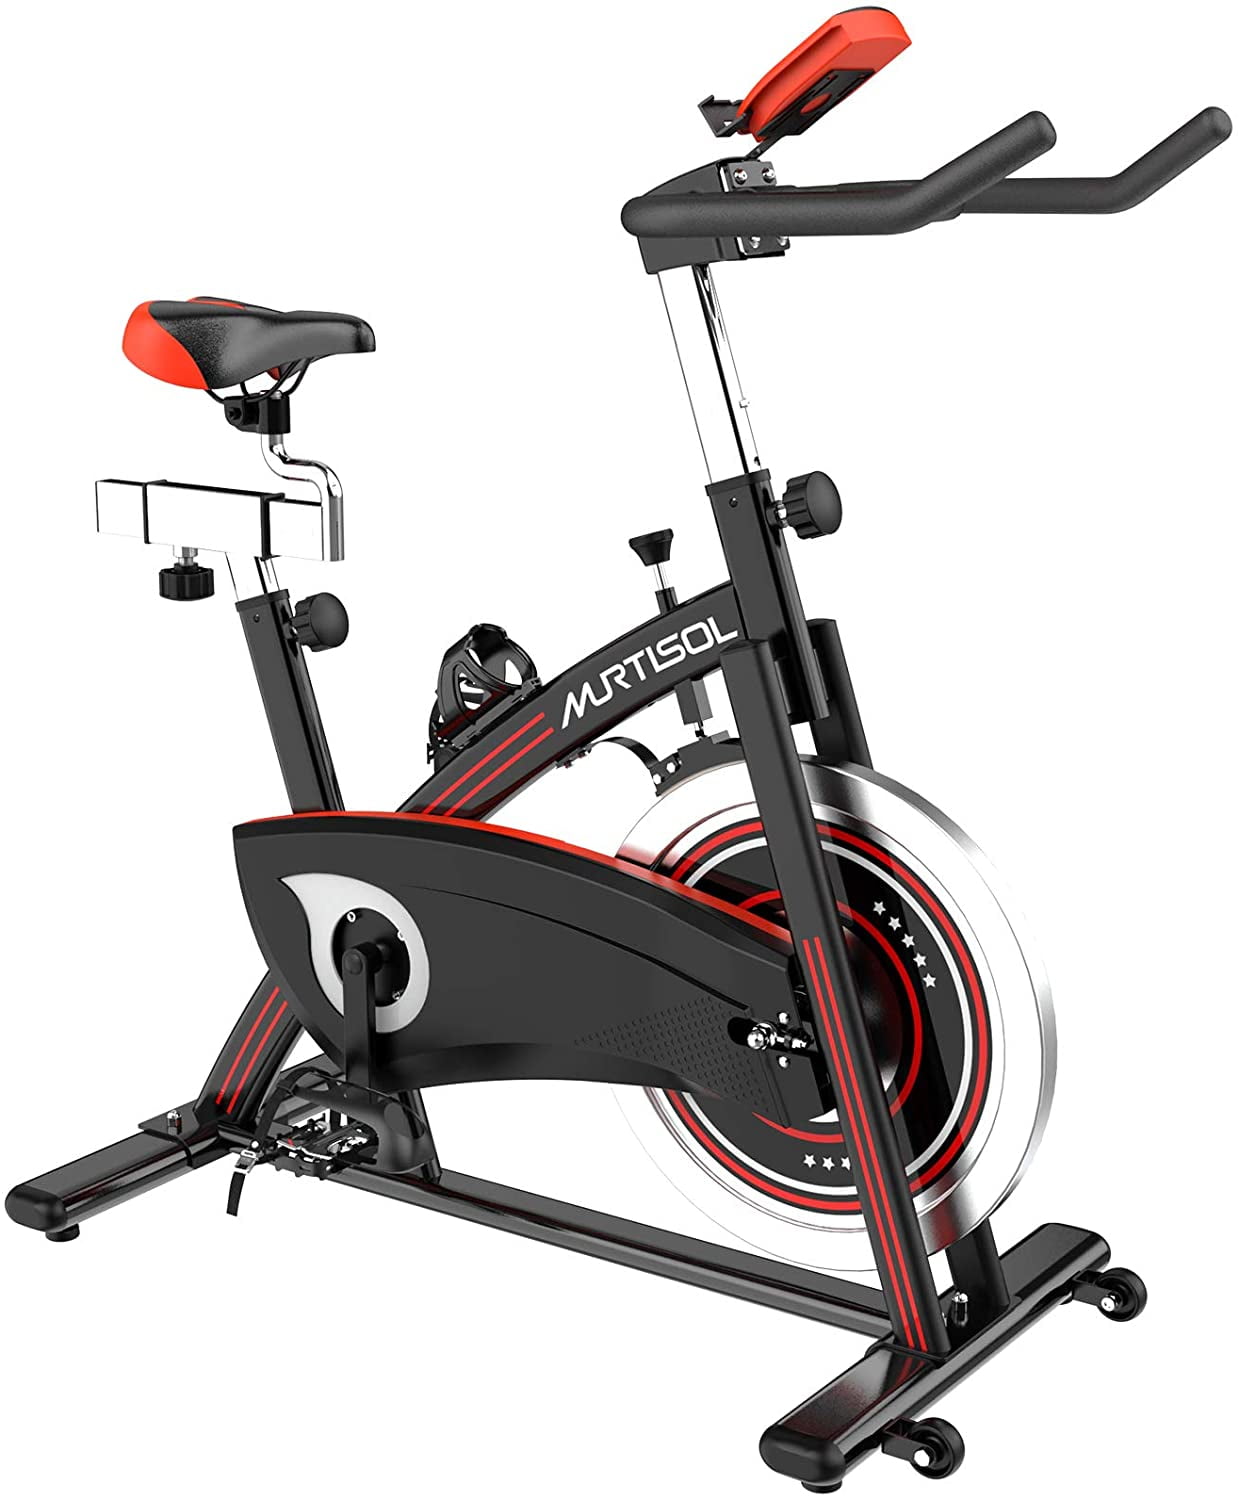 for Home Gym 48lbs Flywheel Murtisol Indoor Cycling Bike Belt Drive Exercise Bike 400LBS Weight Capacity,Stationary Bike W/ Heart Pulse 